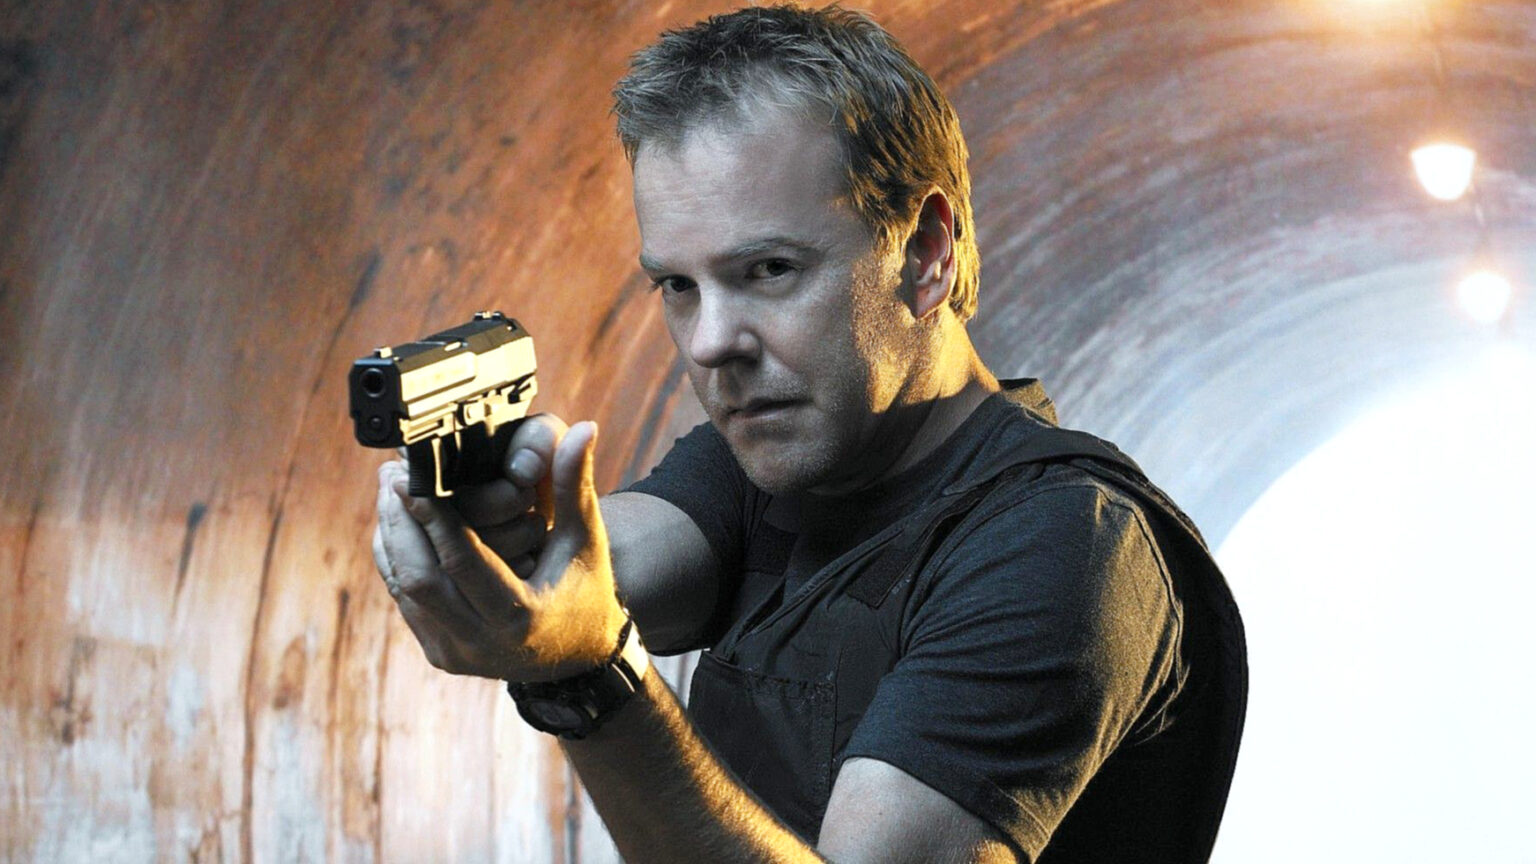 Kiefer Sutherland’s 24 Is Now Free To Watch Online